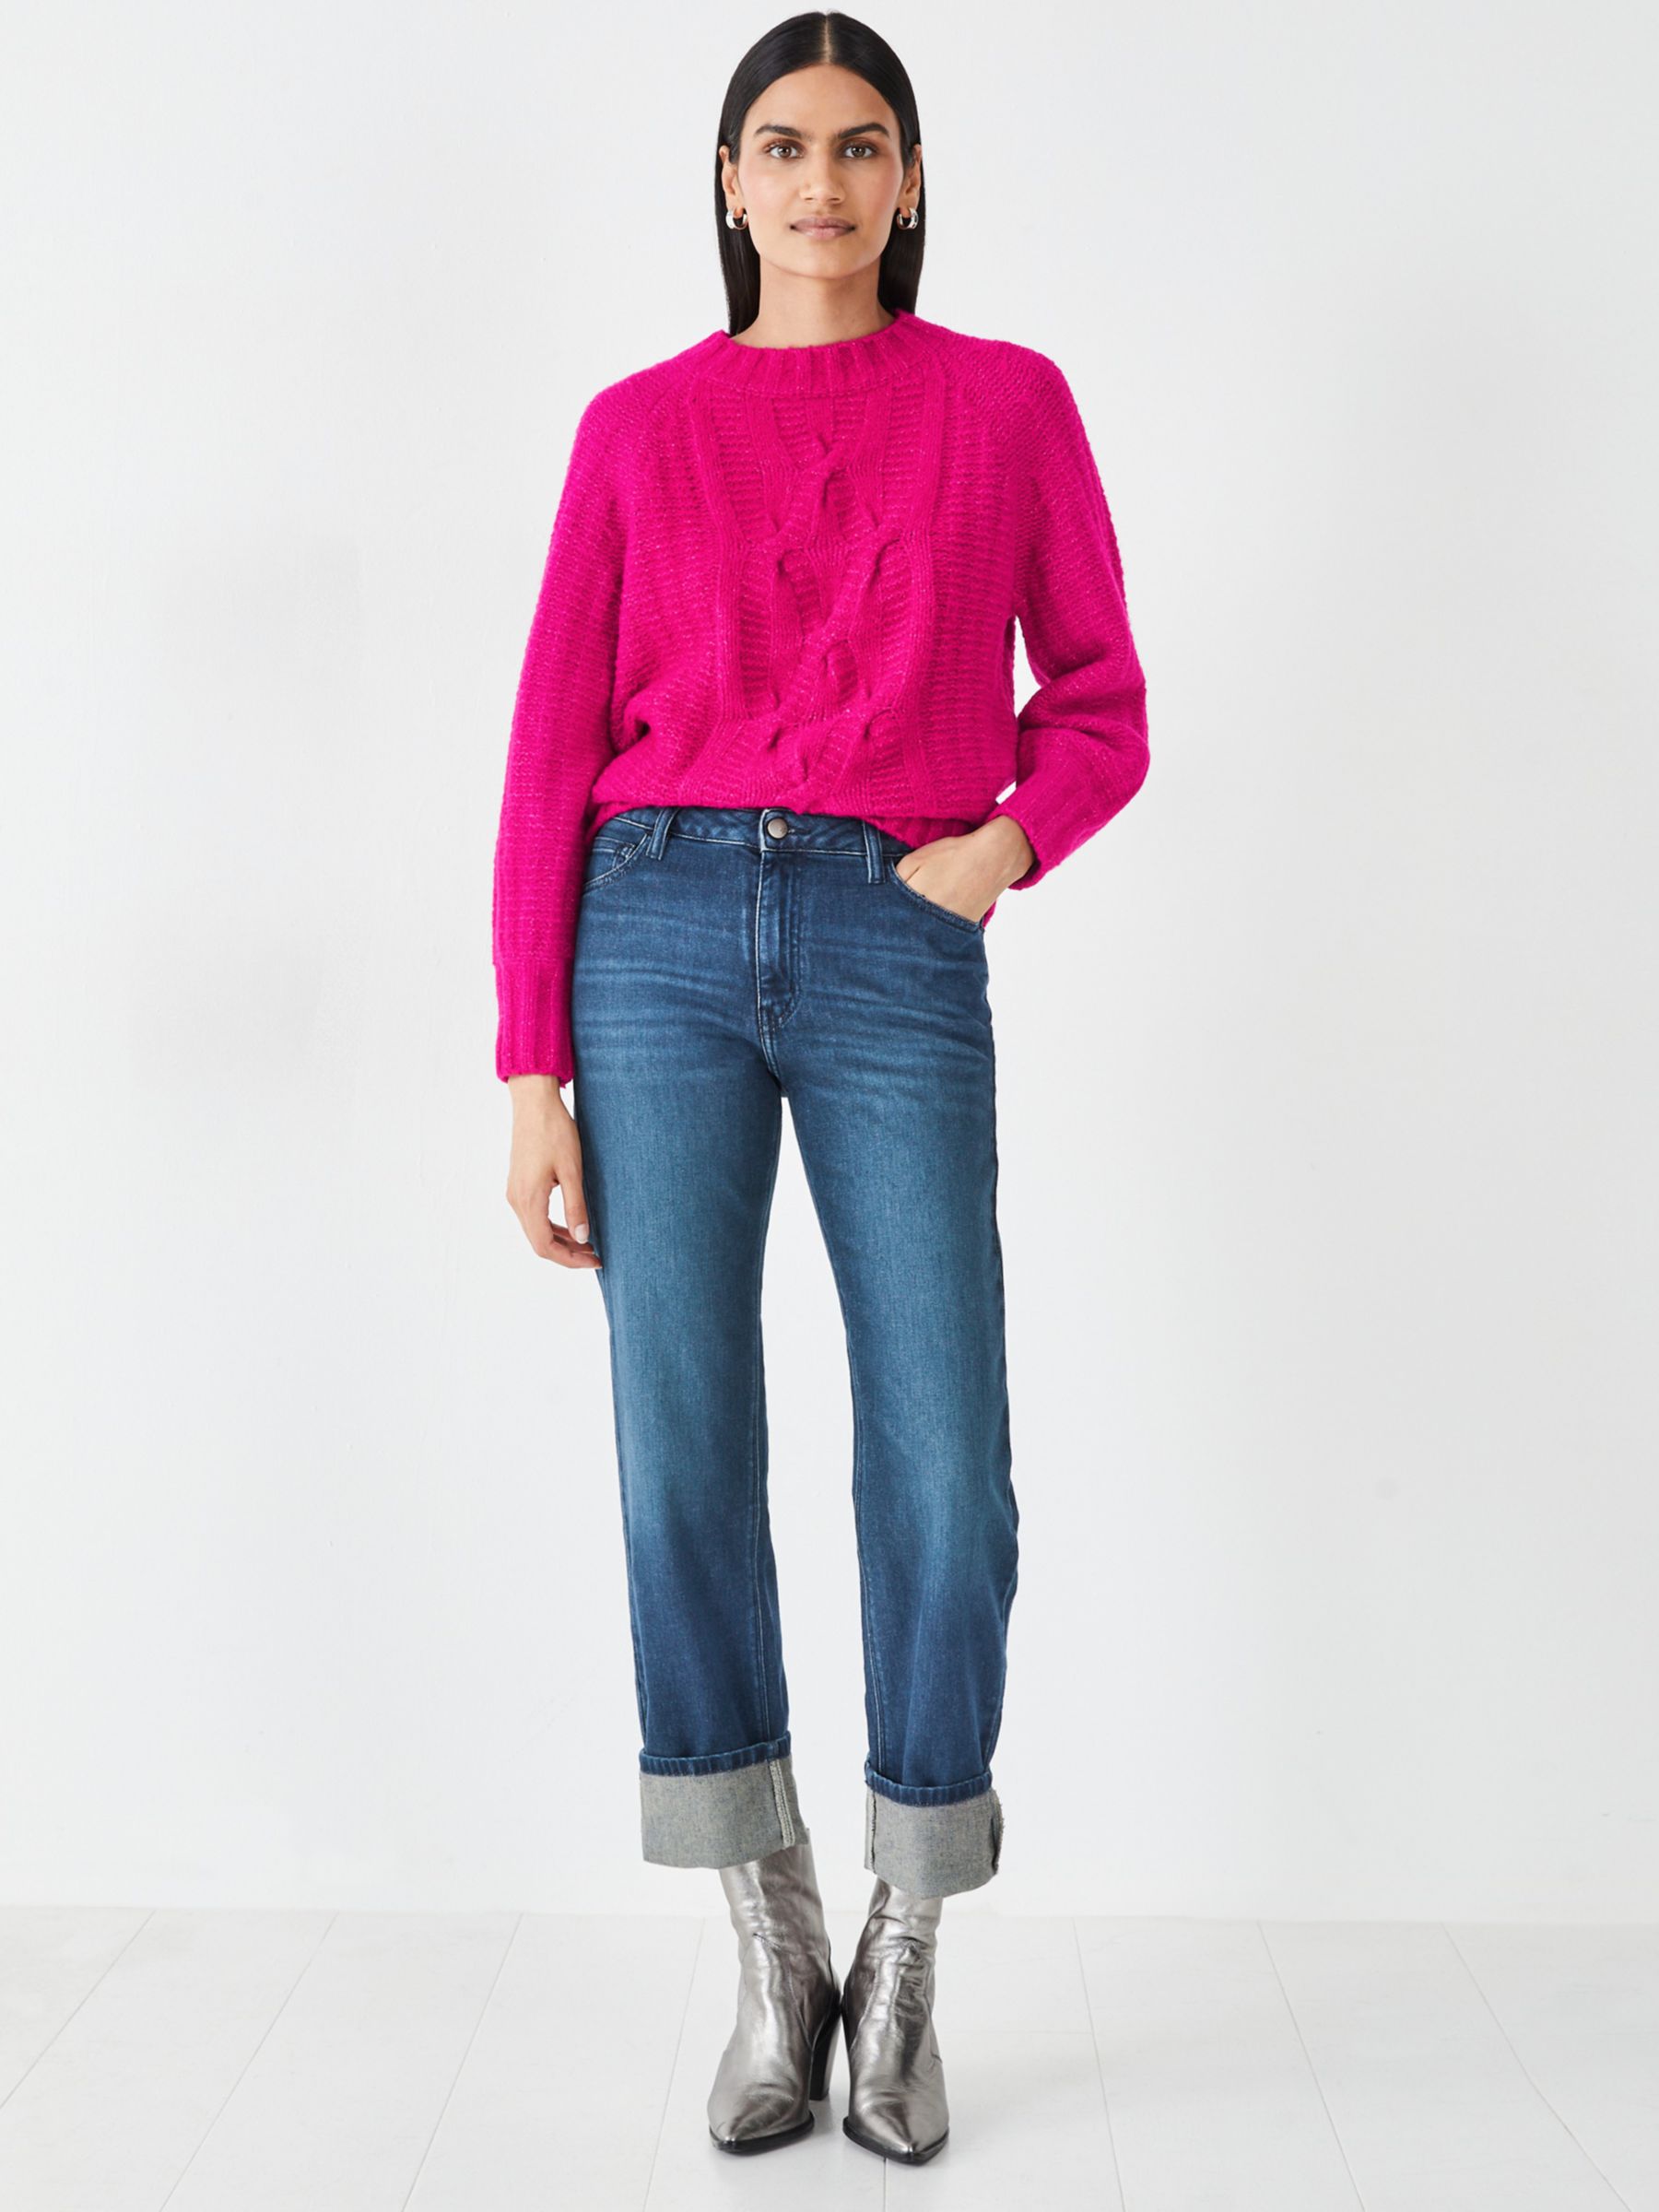 HUSH Nellie Chunky Cable Knit Wool Blend Jumper, Magenta Pink, XXS